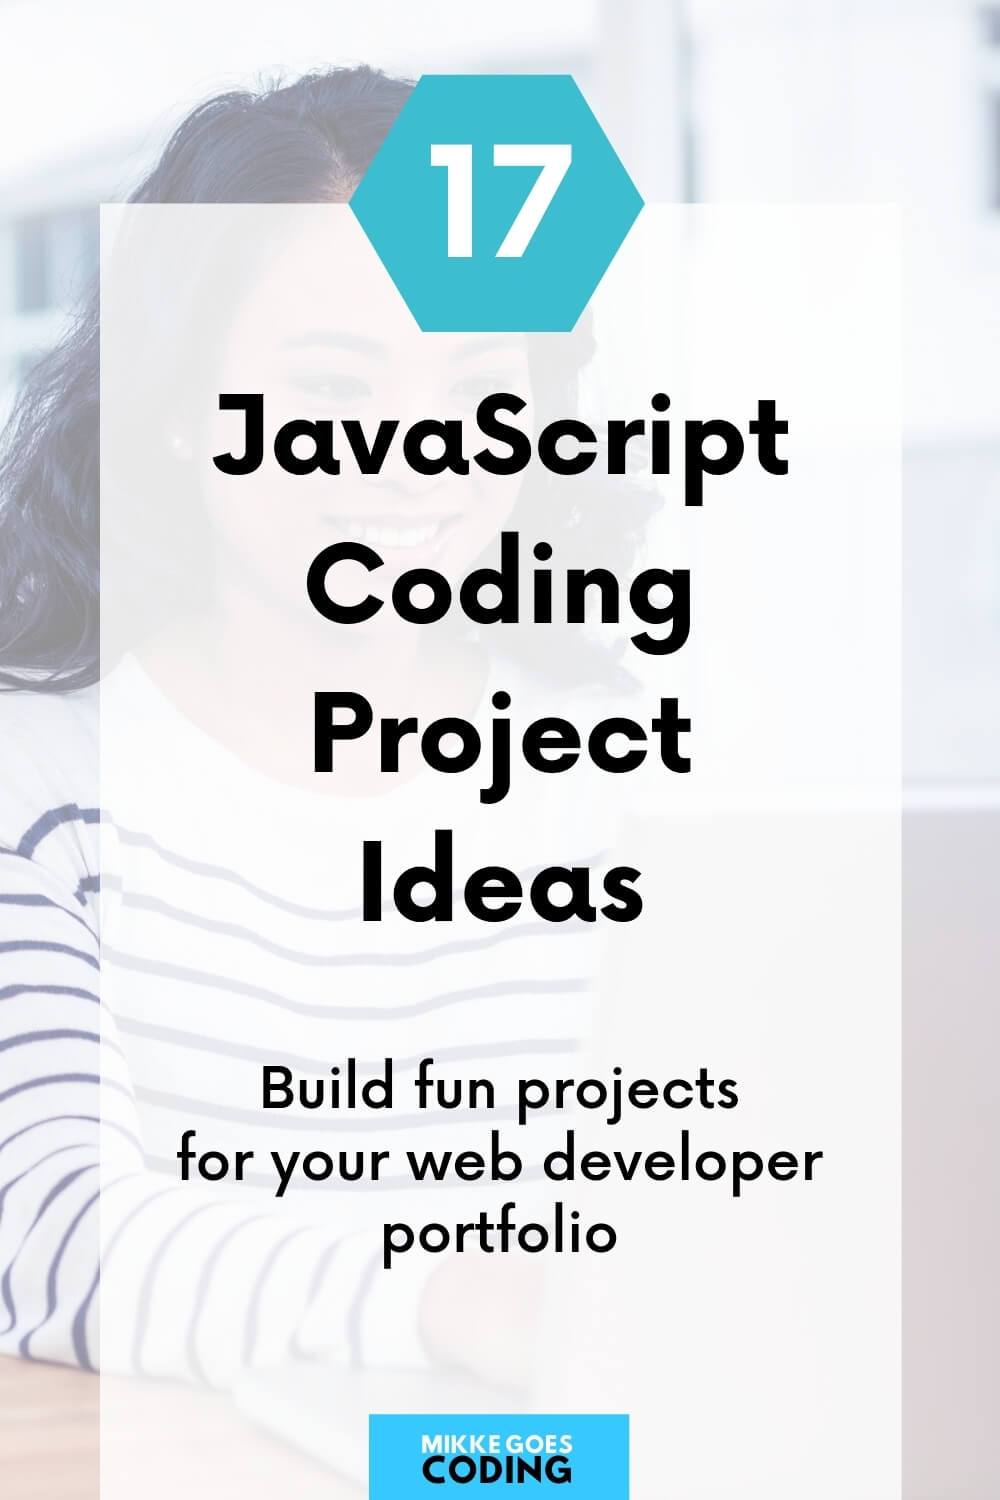 22 JavaScript Projects You Can Build to Perfect Your Coding Skills